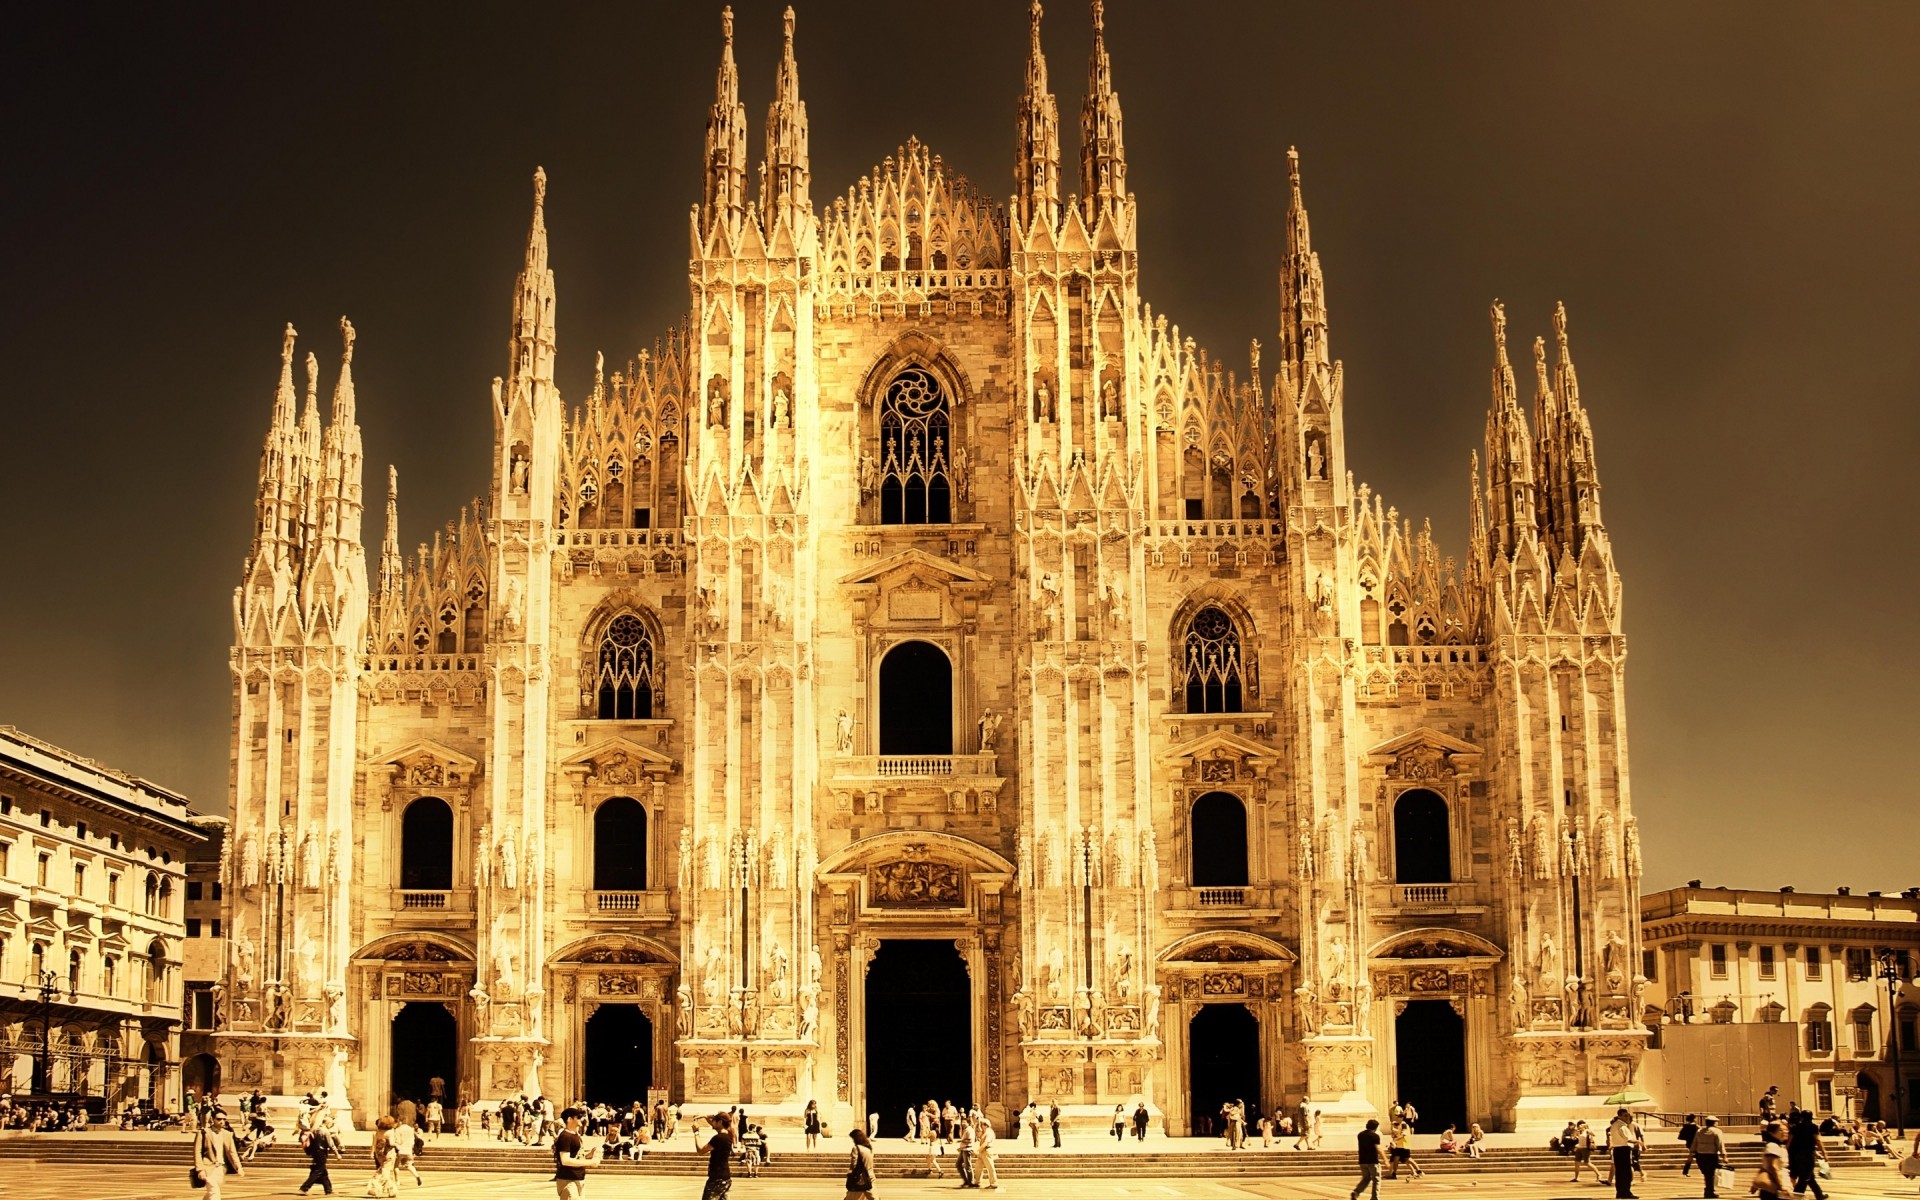 italy architecture travel cathedral church building city outdoors religion sky gothic tower ancient tourism old monument landmark milan milan cathedral